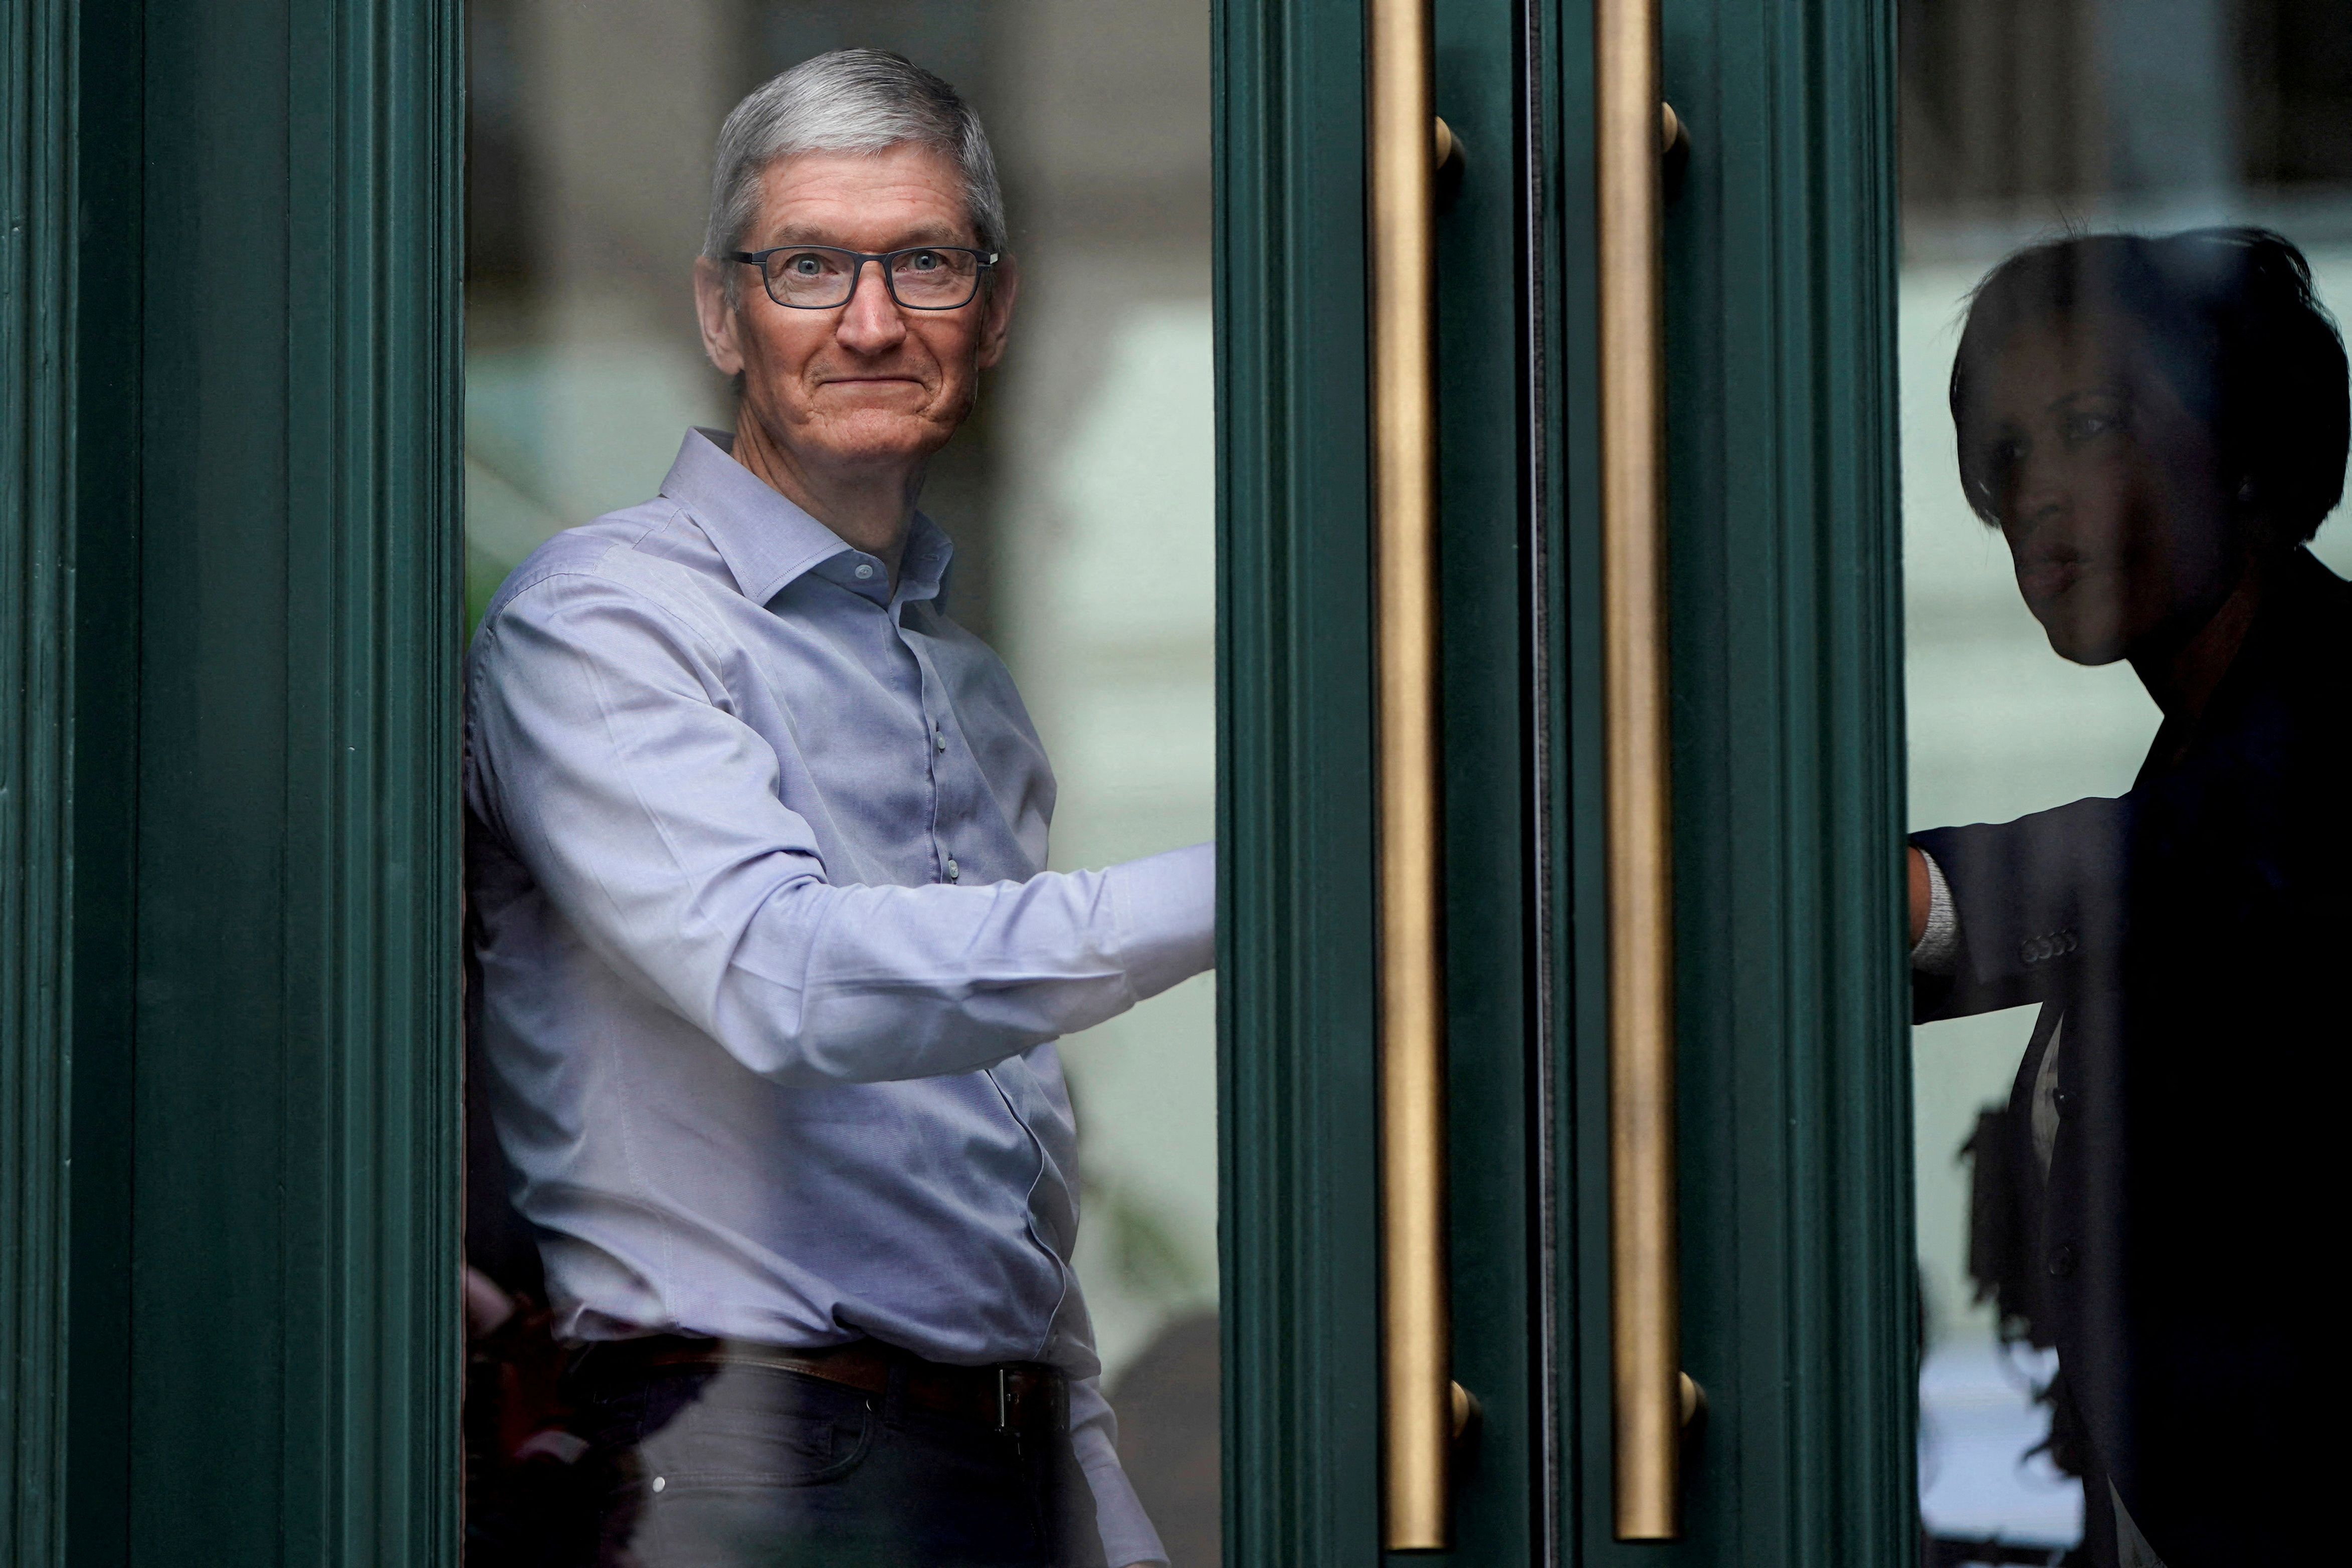 FILE PHOTO: pple Chief Executive Officer Tim Cook watches customers awaiting the grand opening of the new Apple Carnegie Library store in Washington